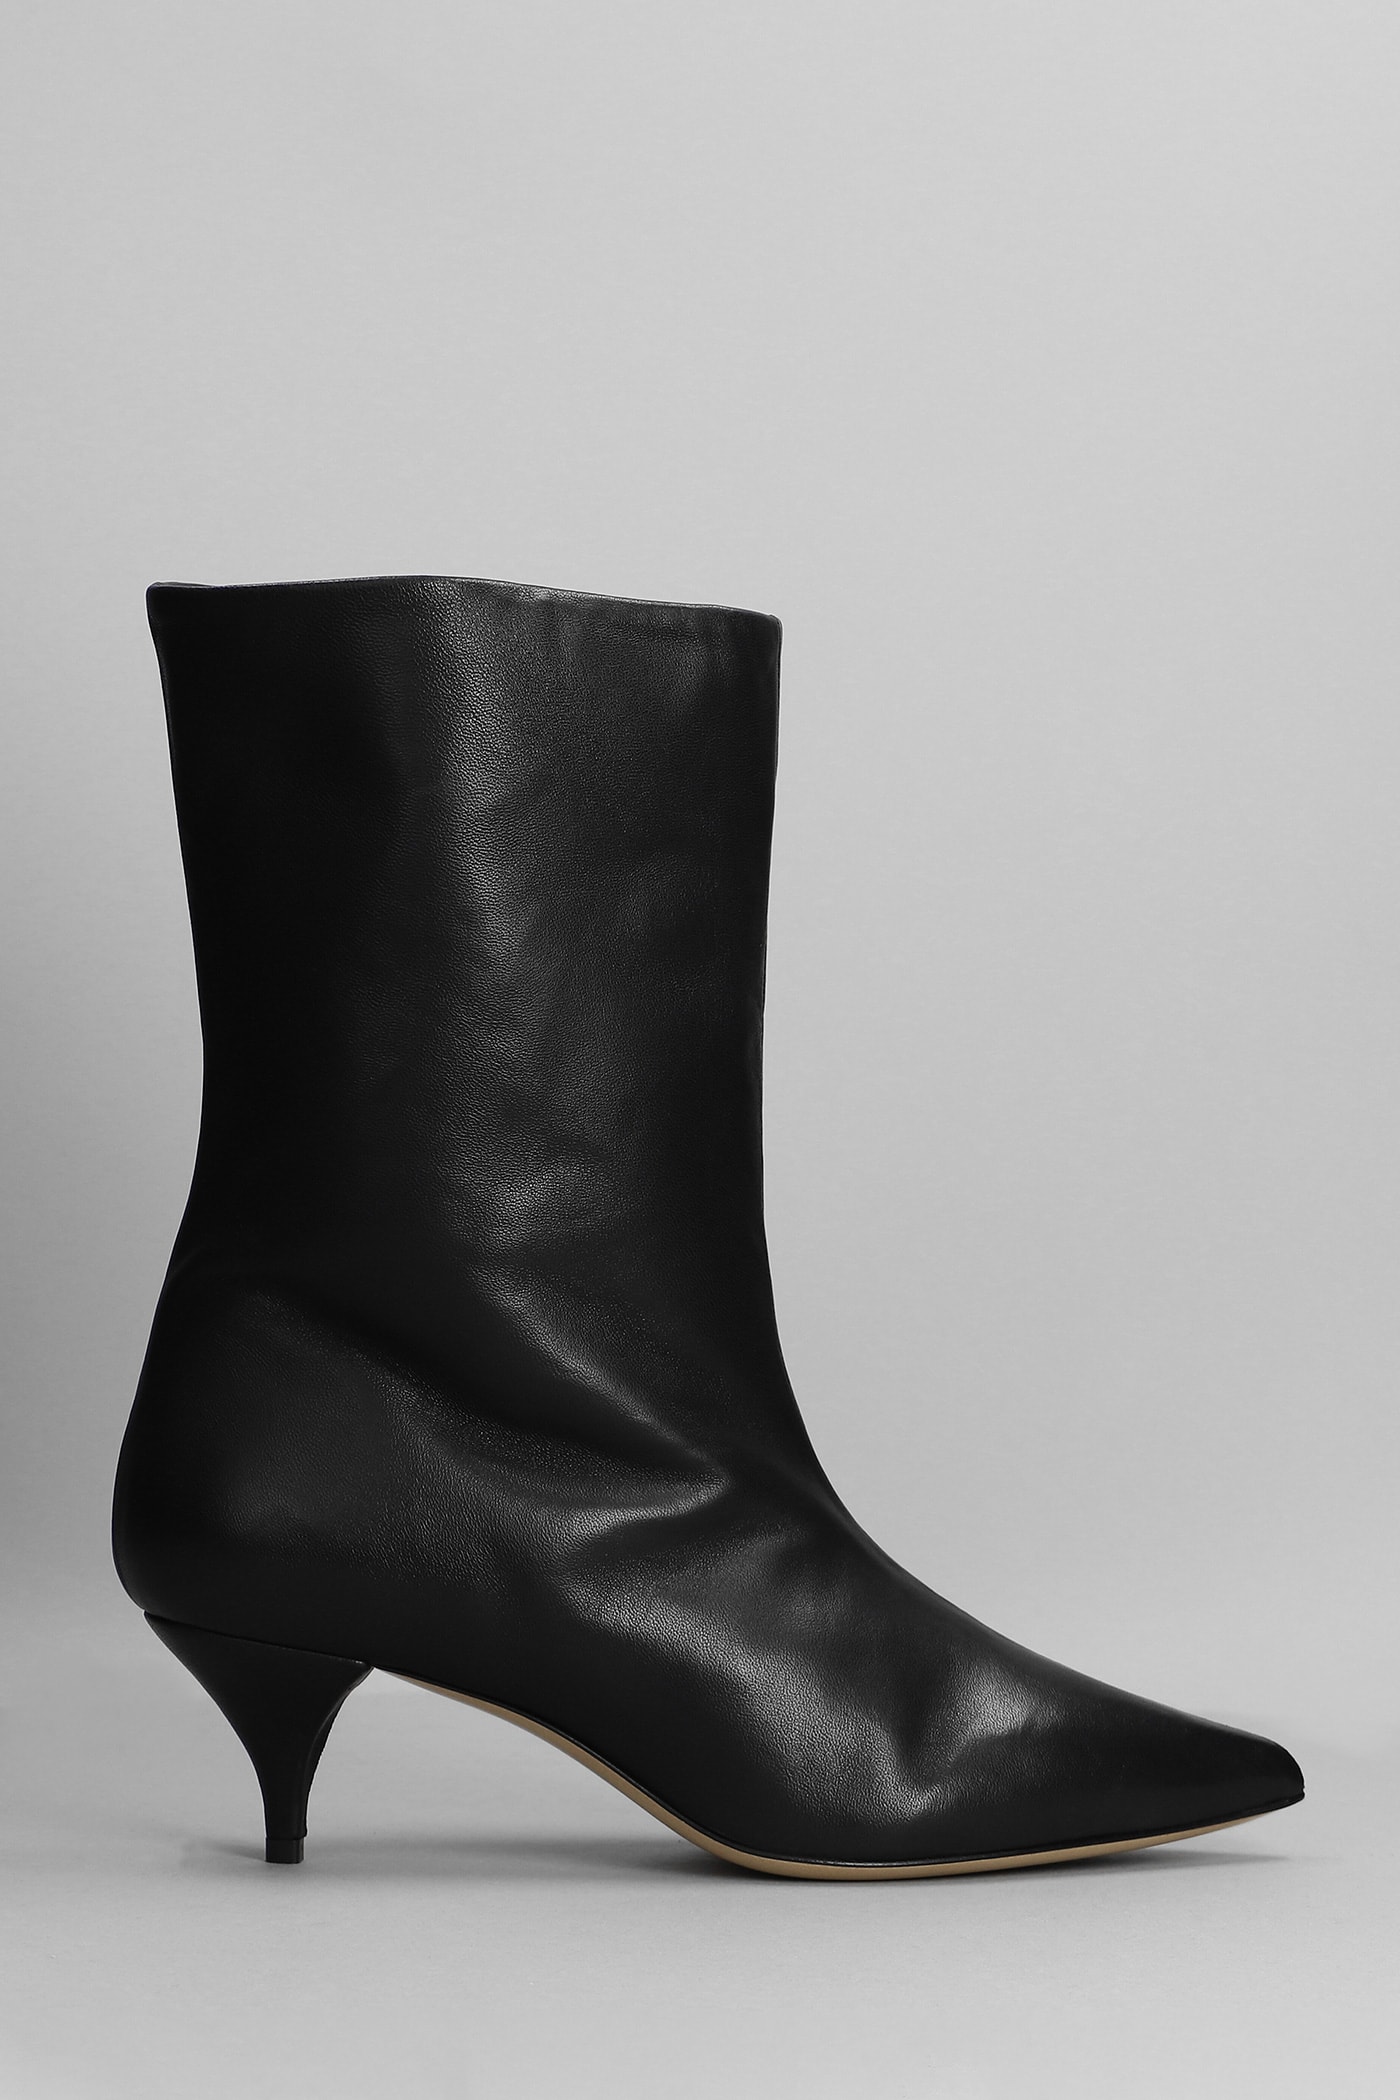 Alchimia High Heels Ankle Boots In Black Leather